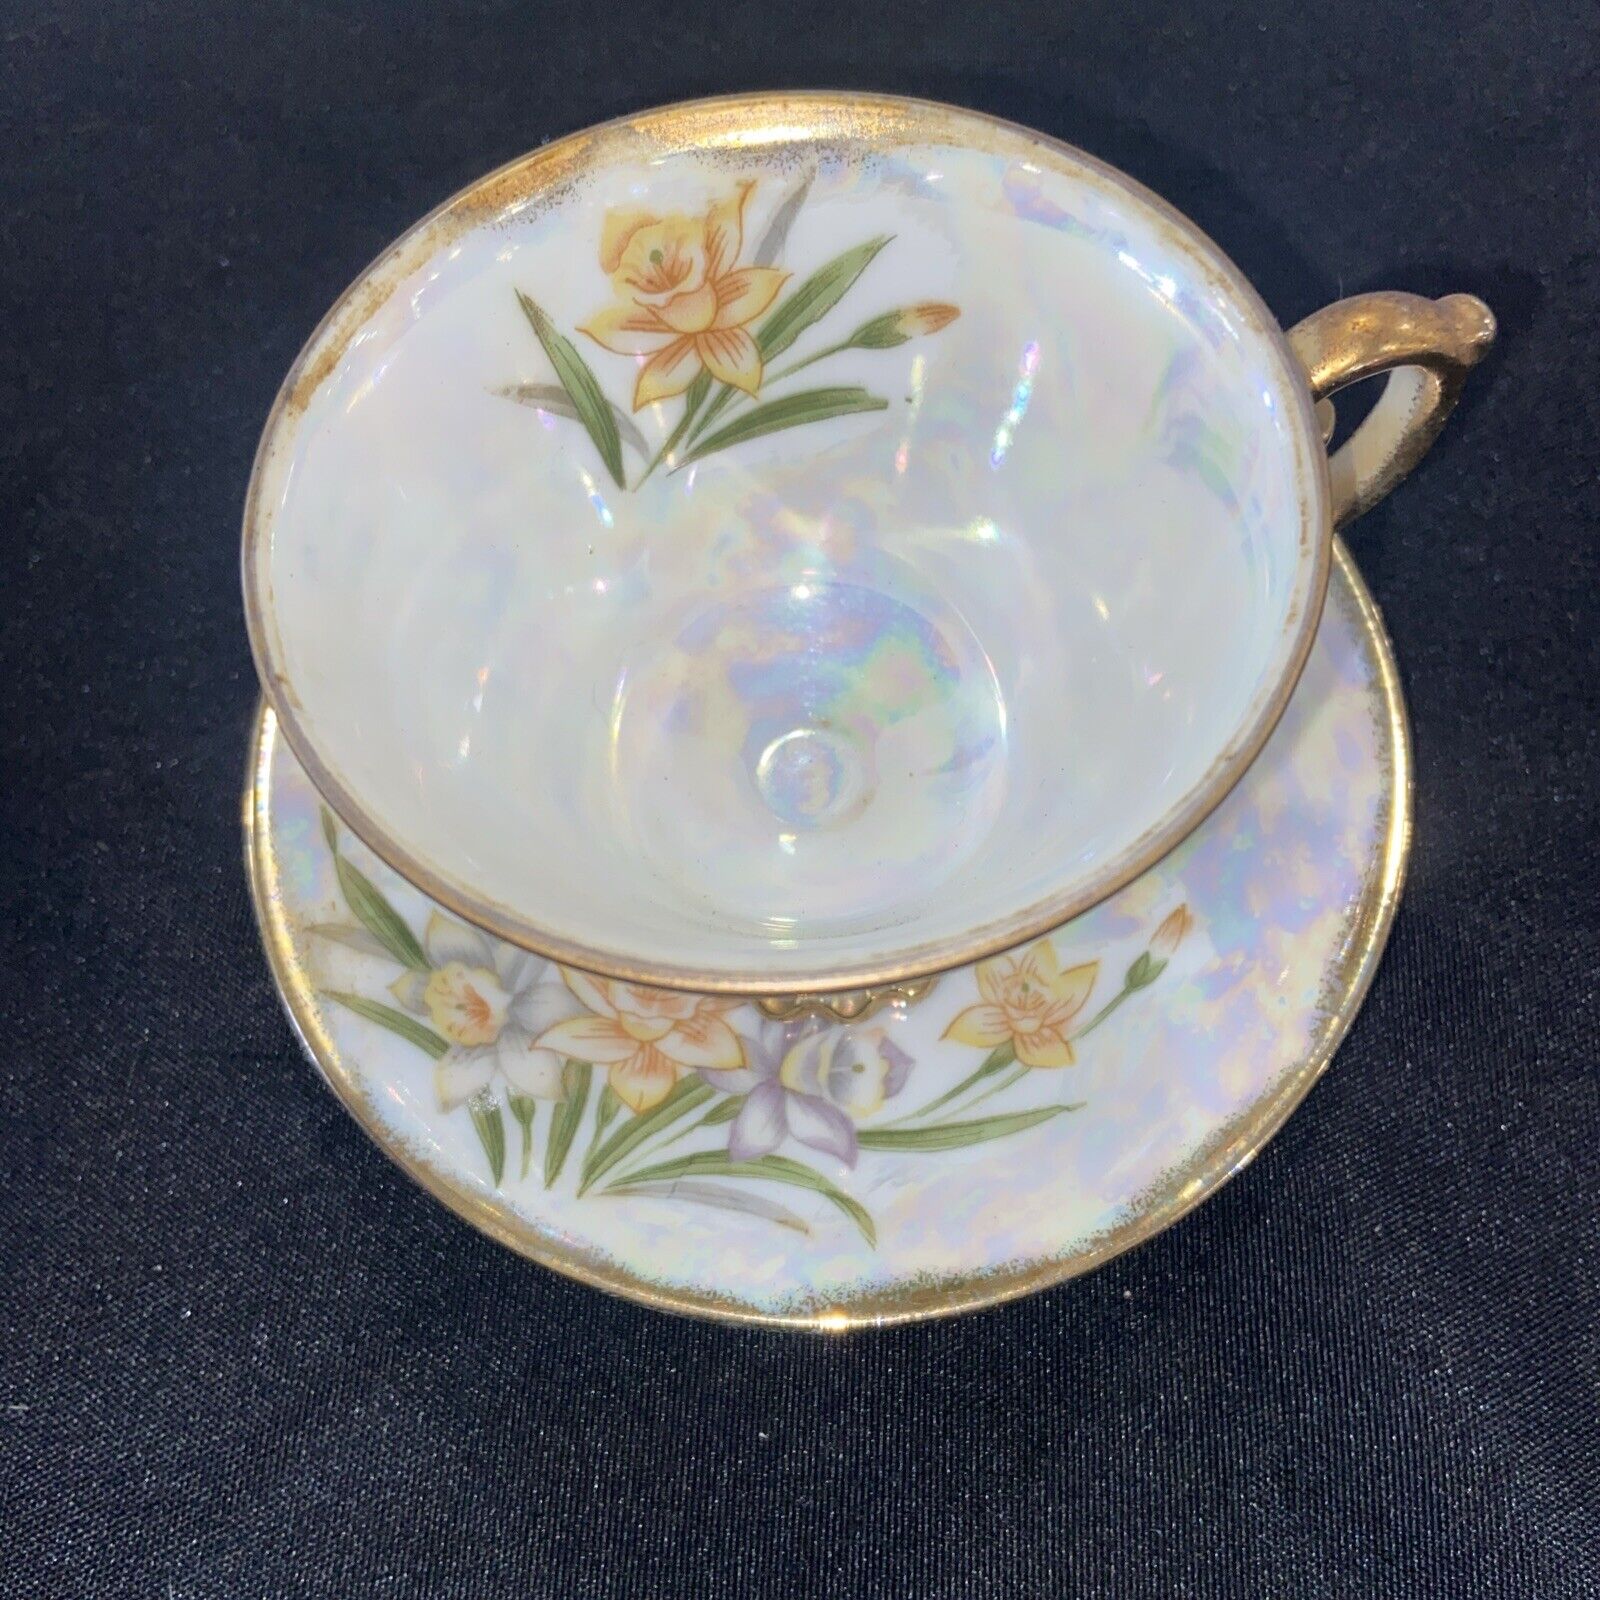 Vintage March Daffodil  Footed Porcelain Teacup & Saucer iridescent lusterware 